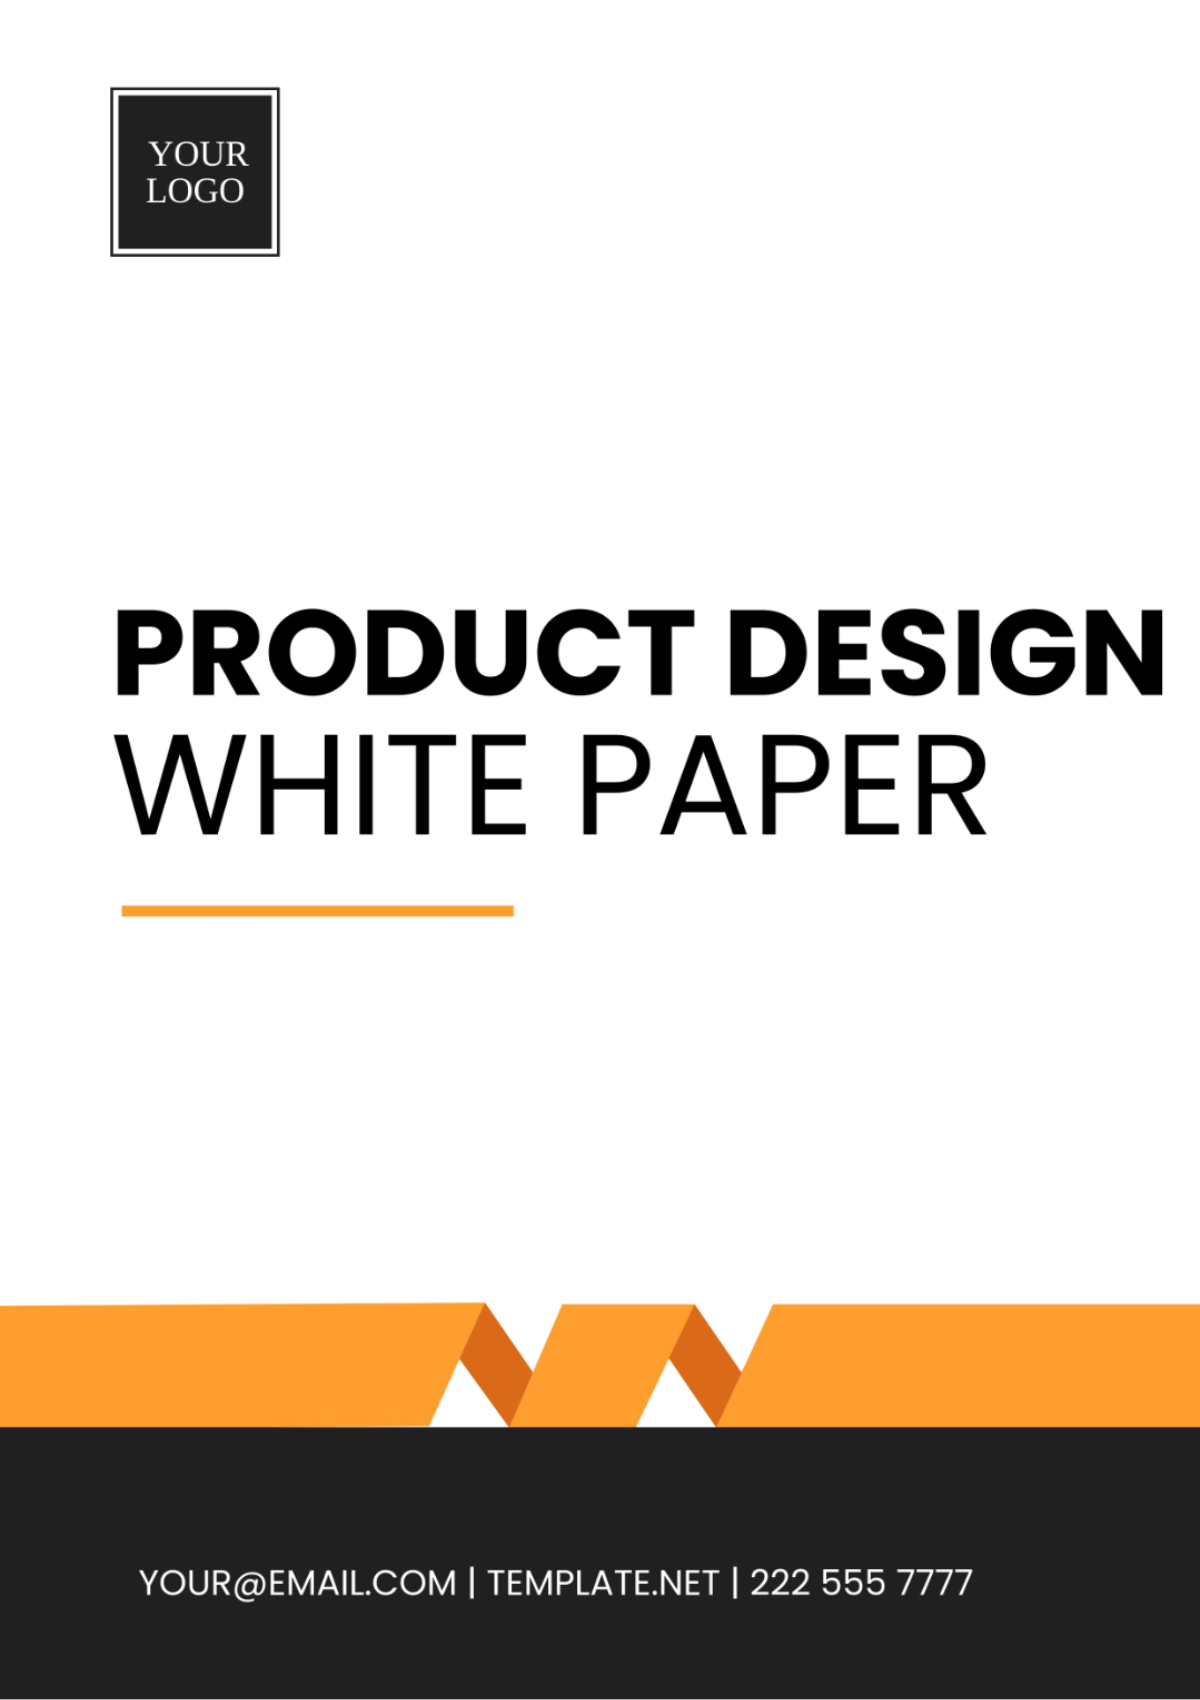 Product Design White Paper Template